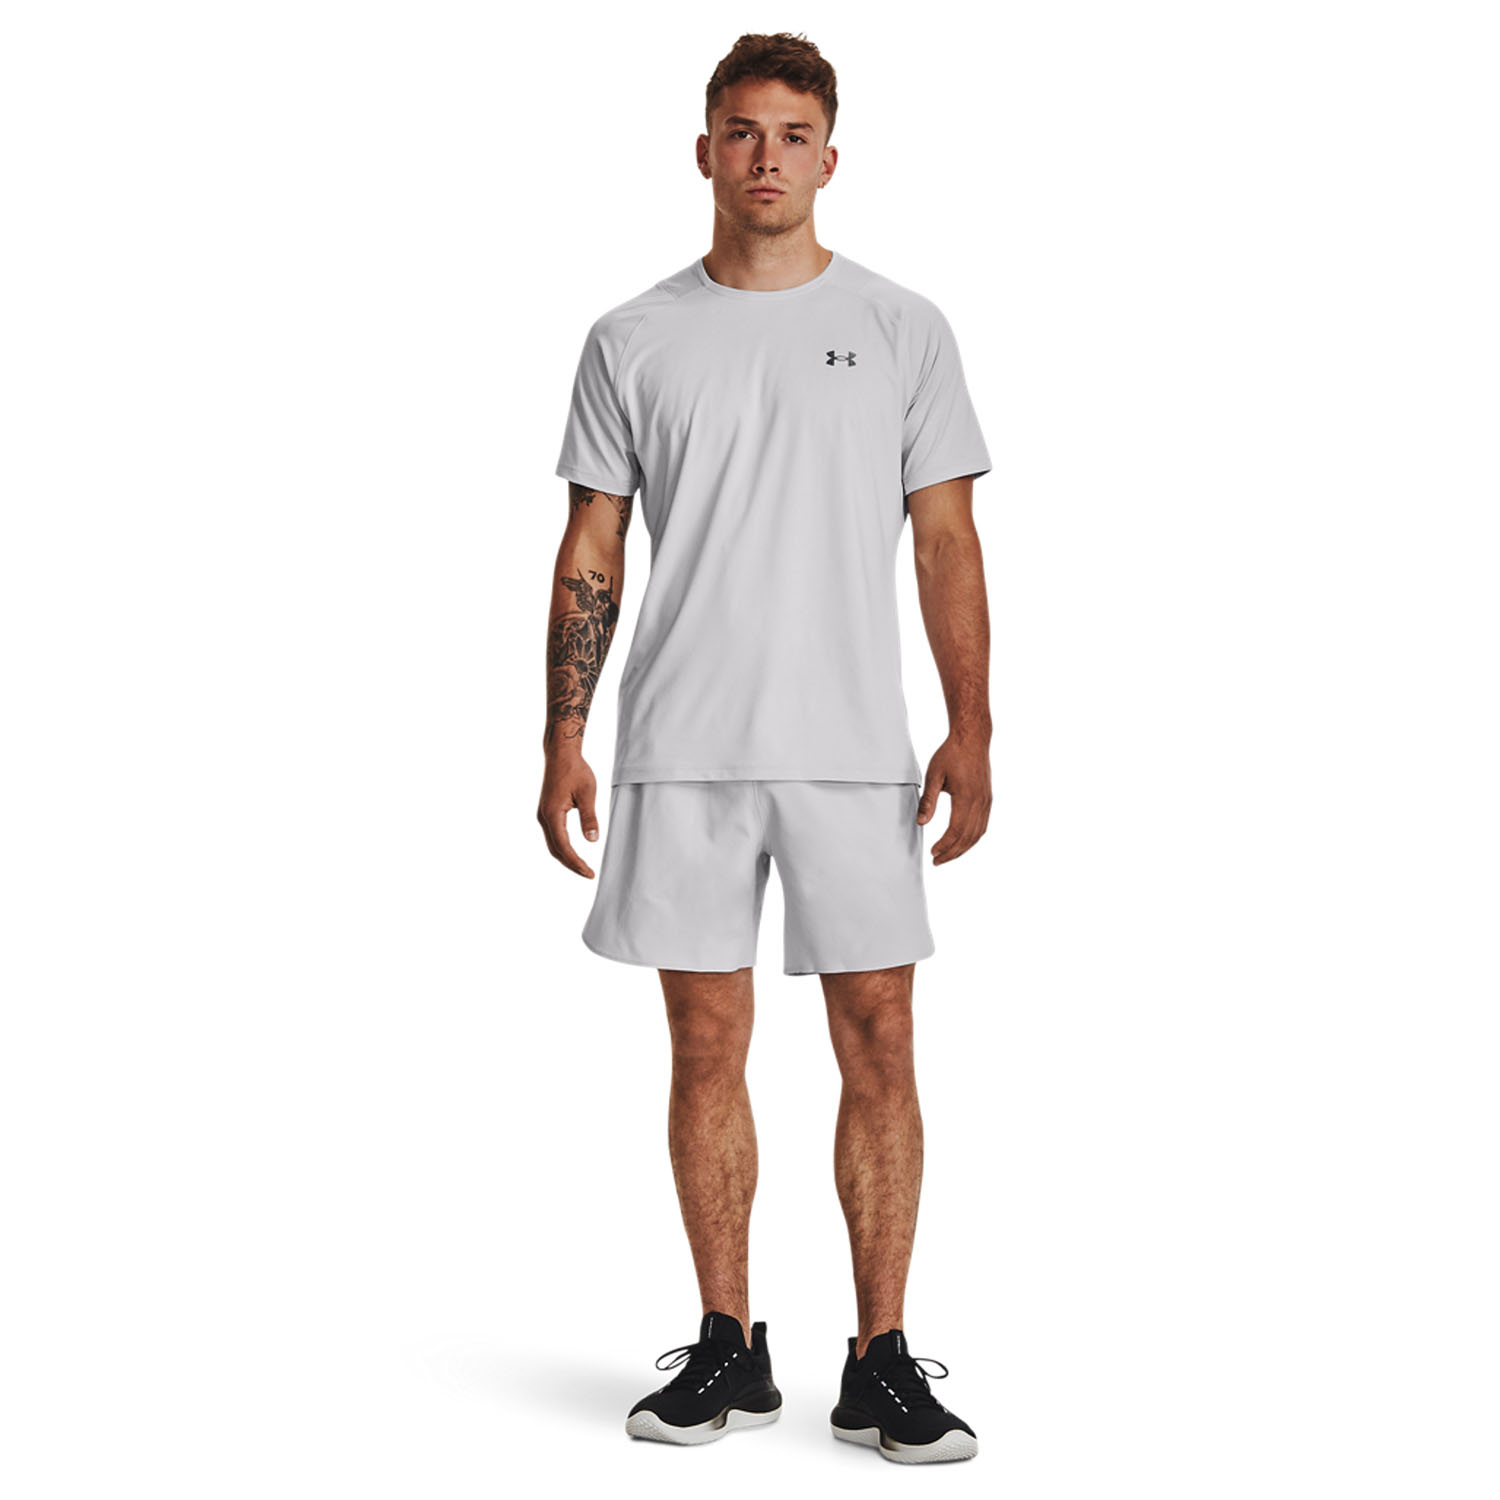 Under Armour Peak Woven 6in Shorts - Halo Gray/Black